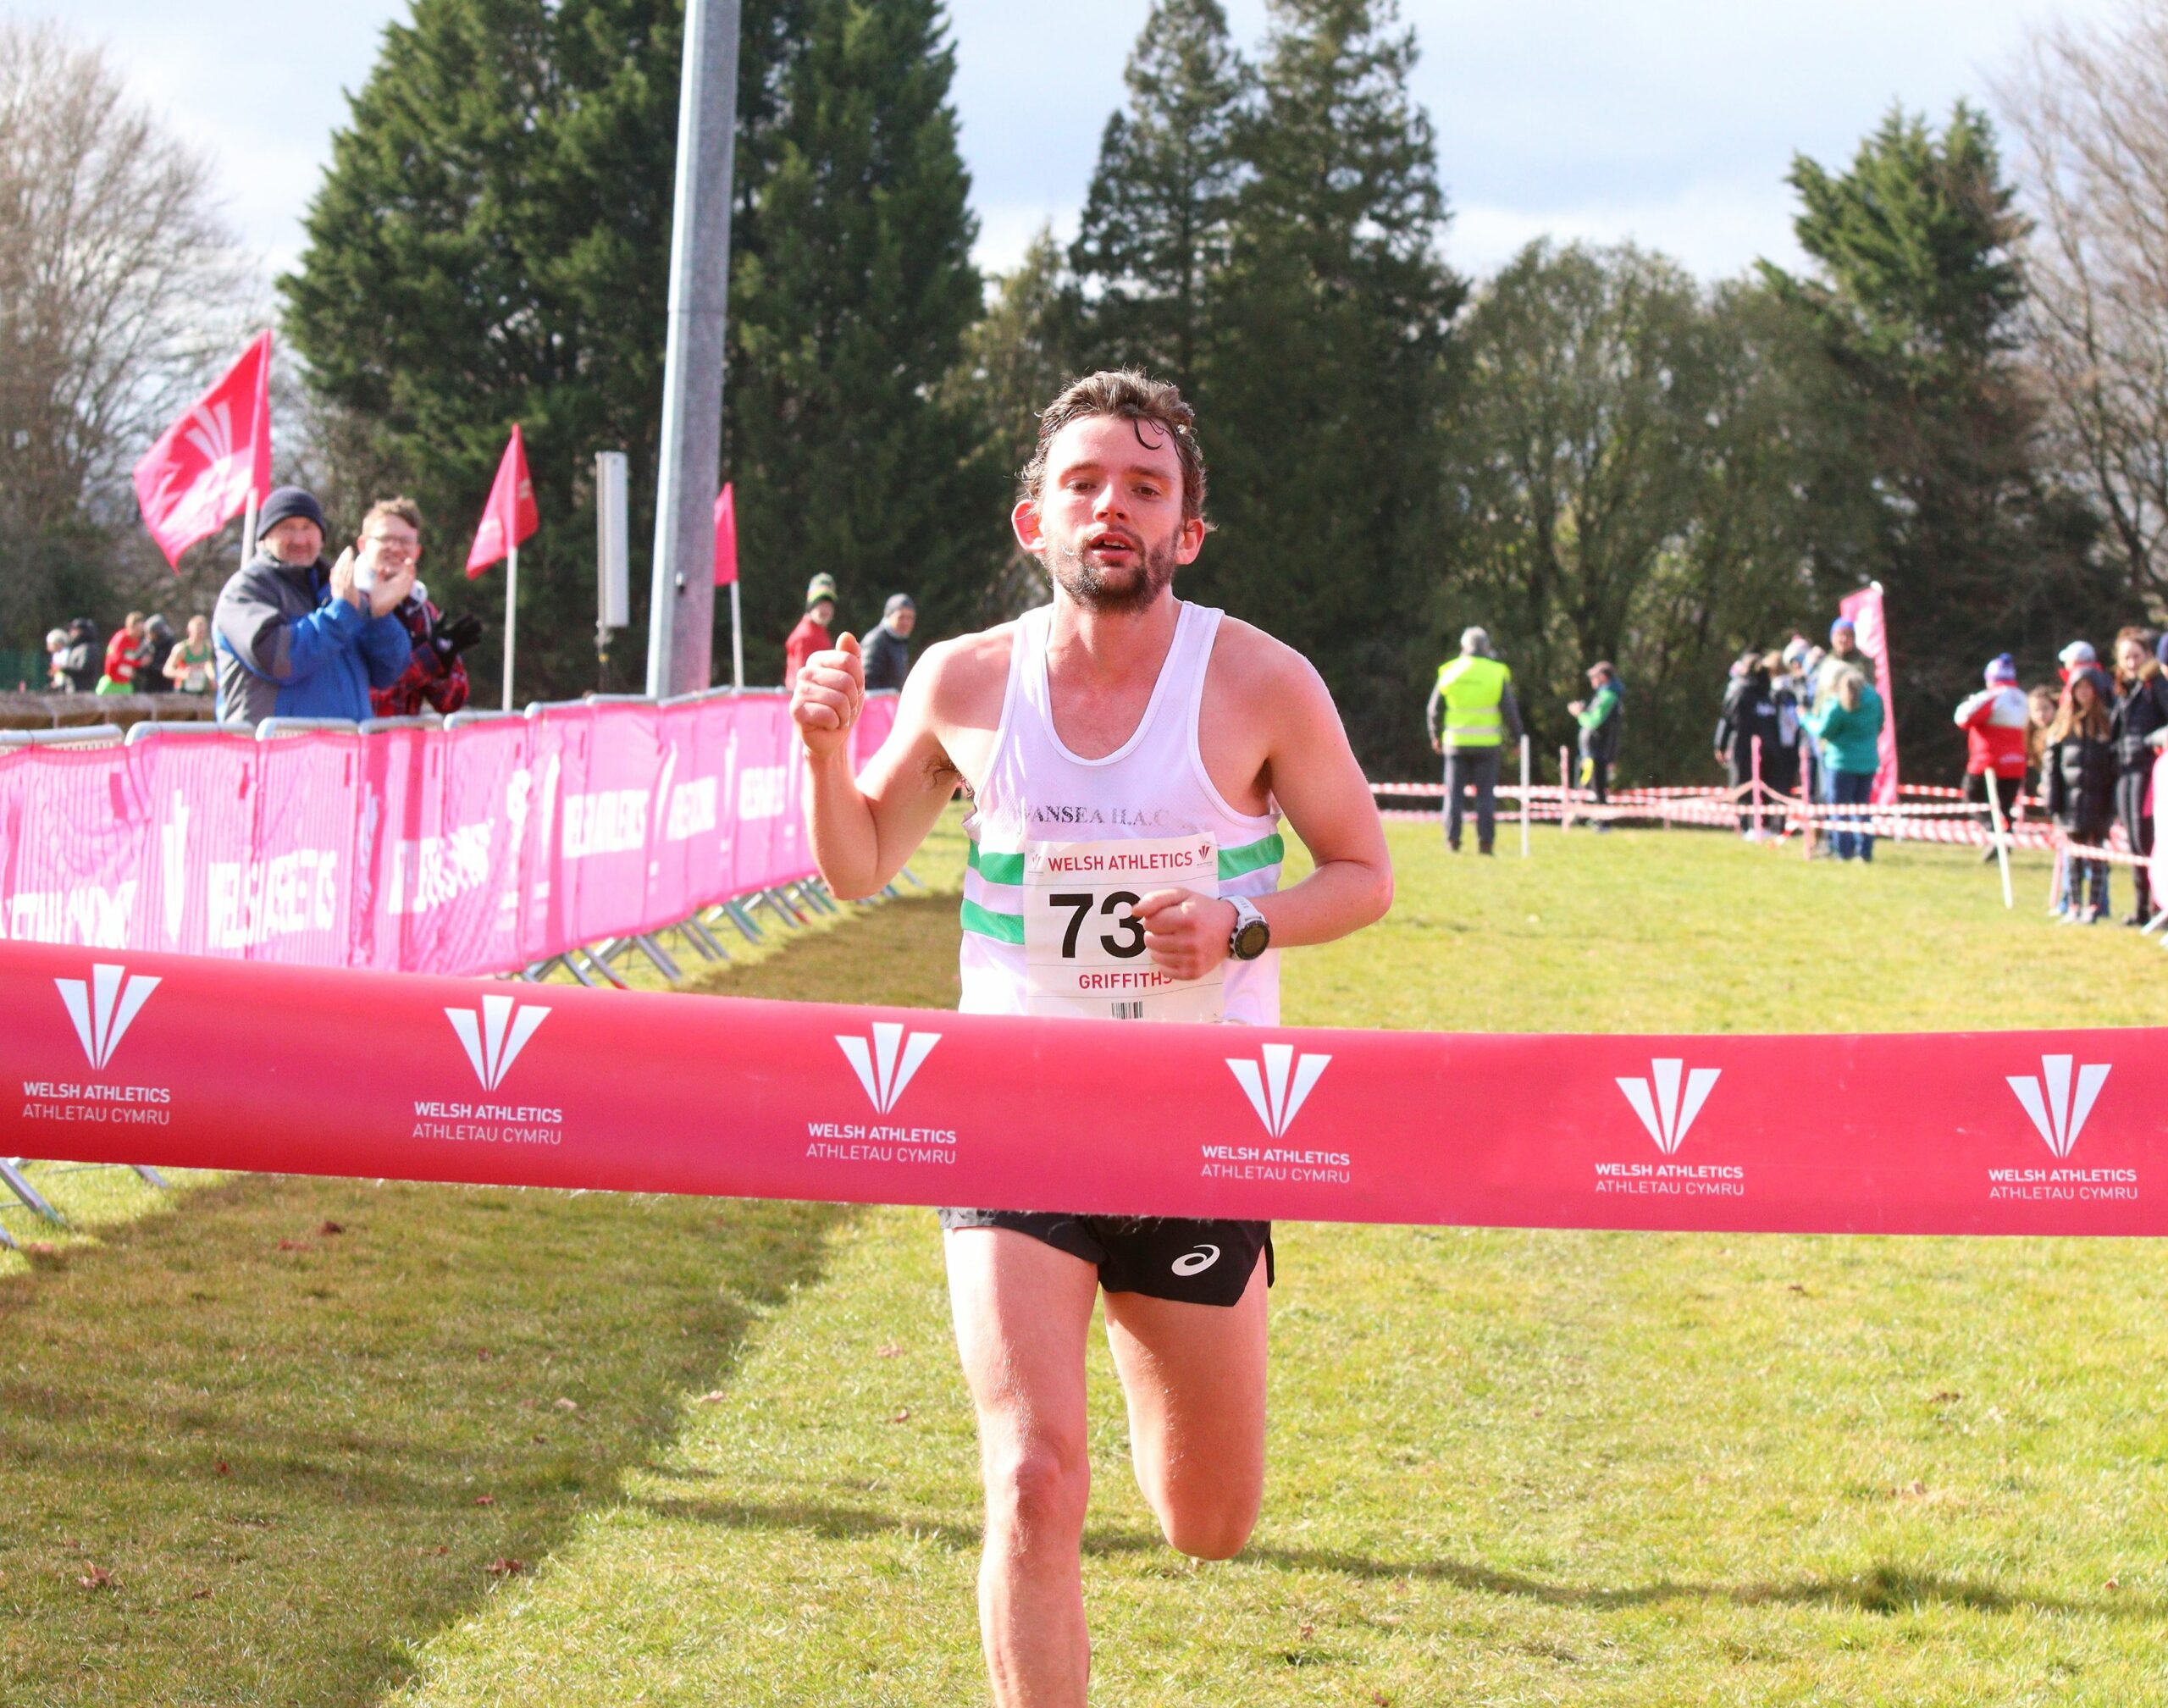 Dewi Griffiths Is Wales' Best Cross Country Runner - Dewi Griffiths